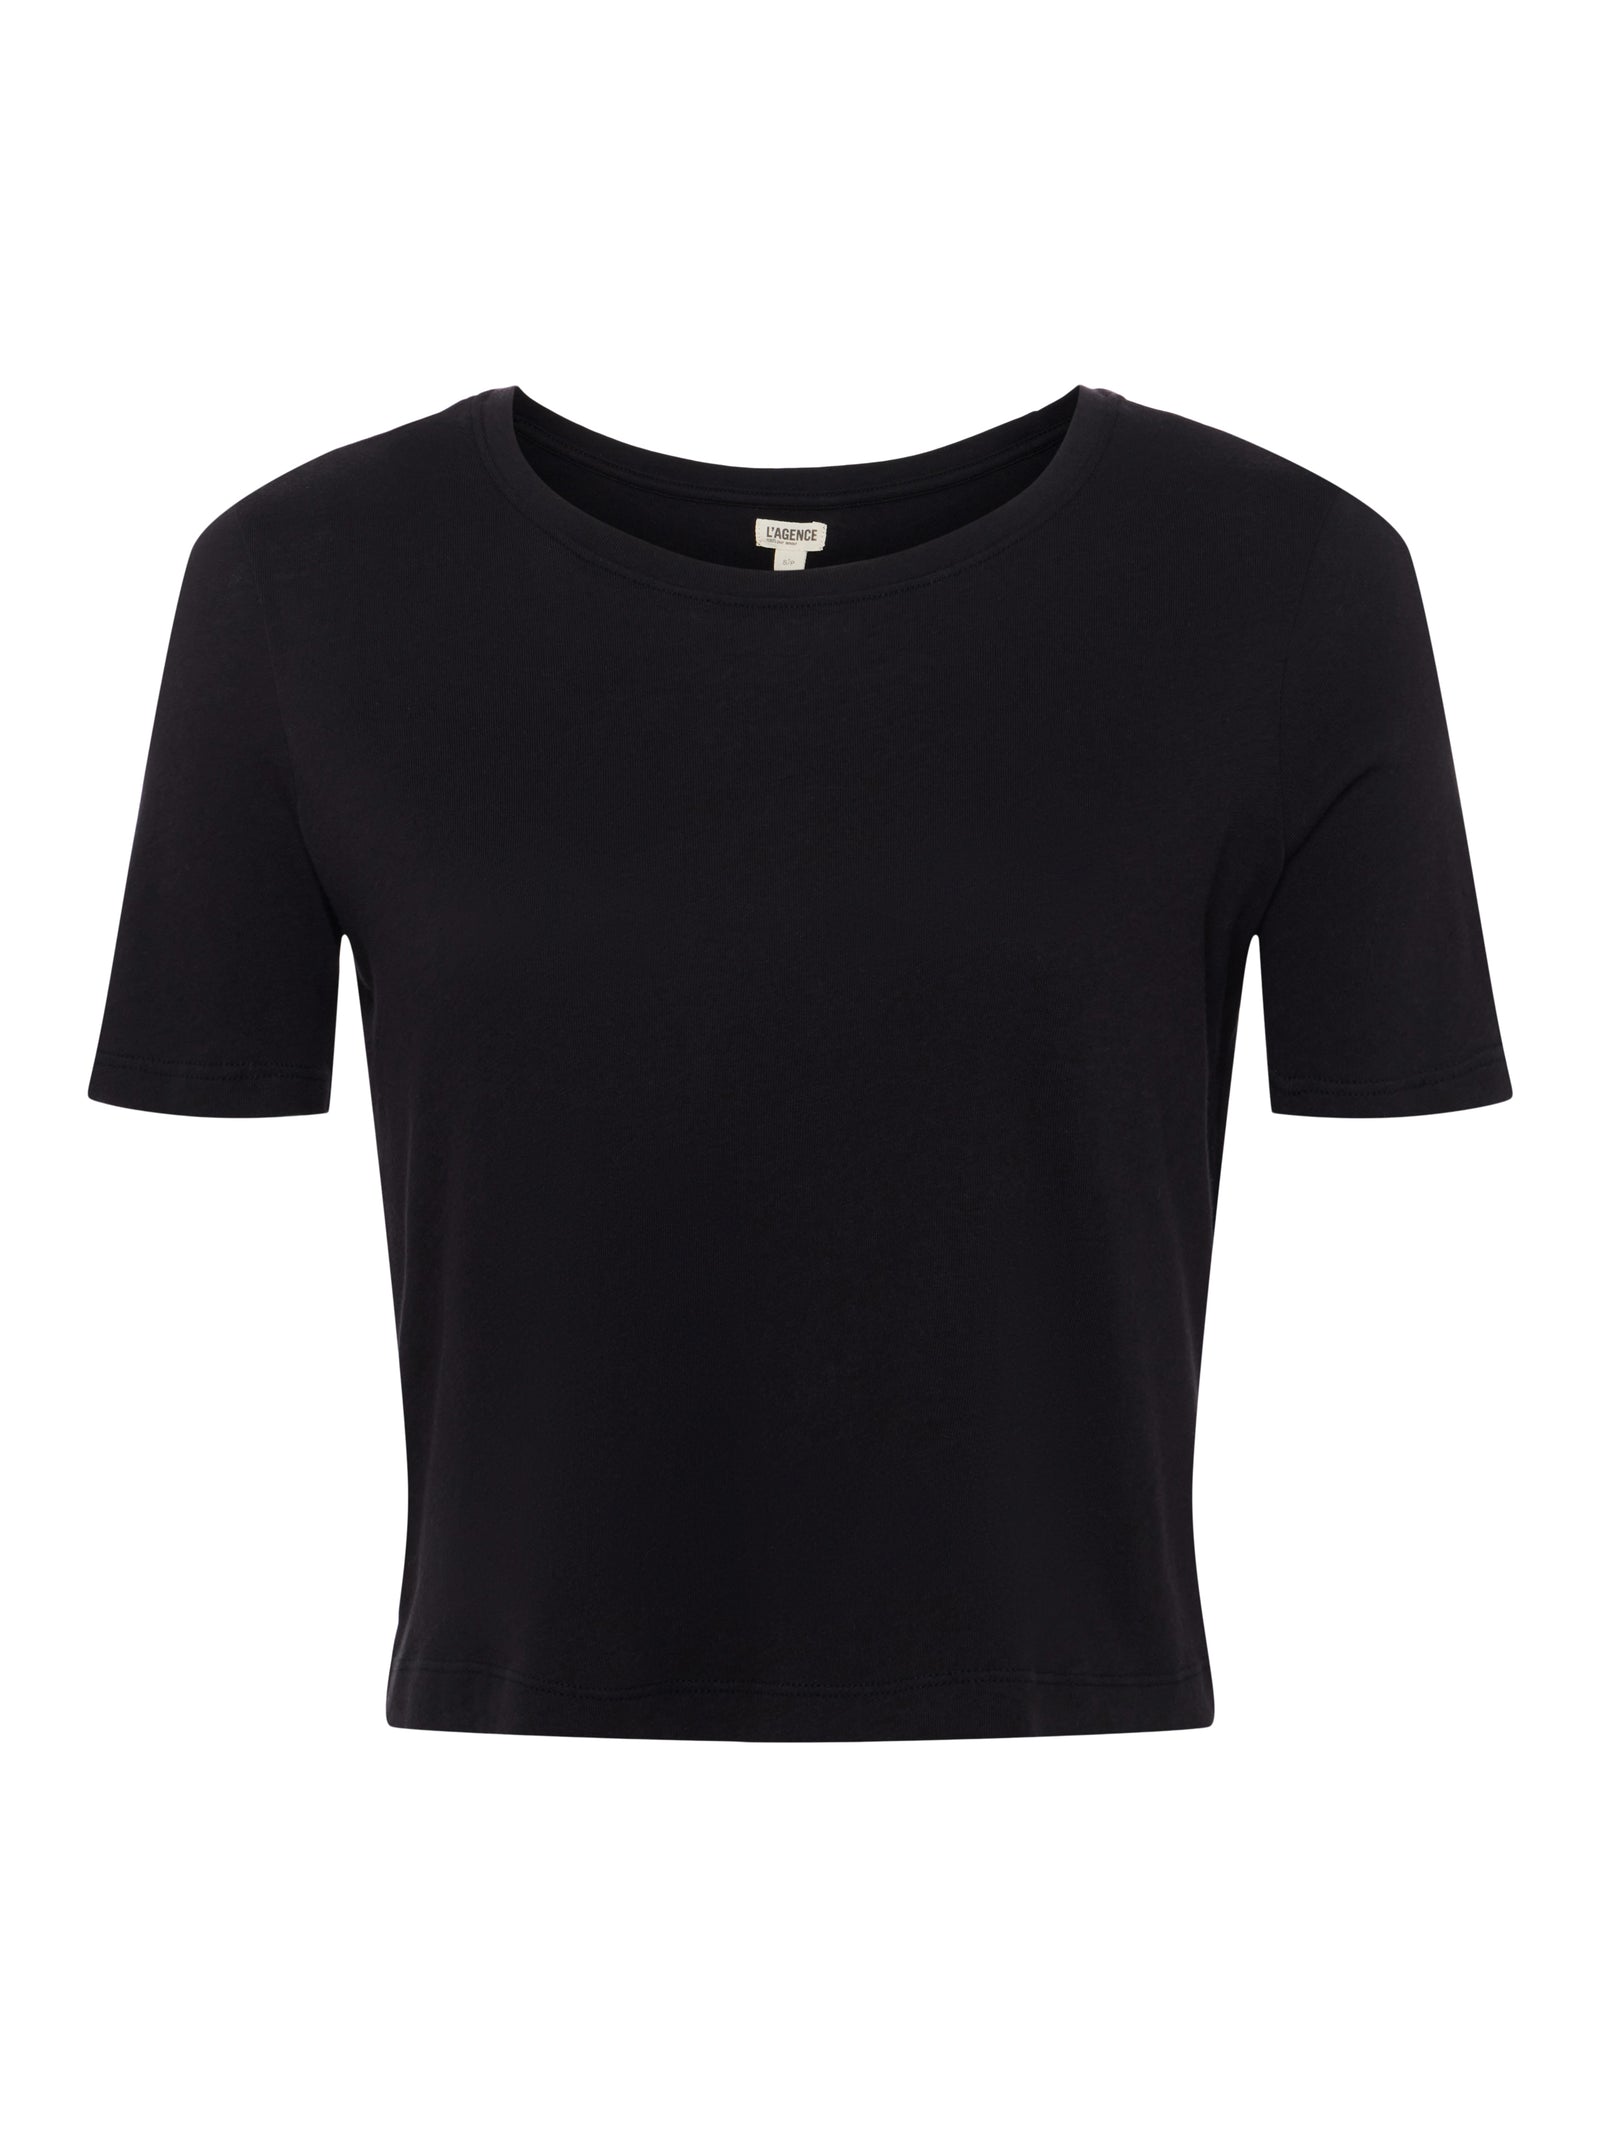 L'AGENCE - Donna Cotton Crewneck Cropped Tee in Black